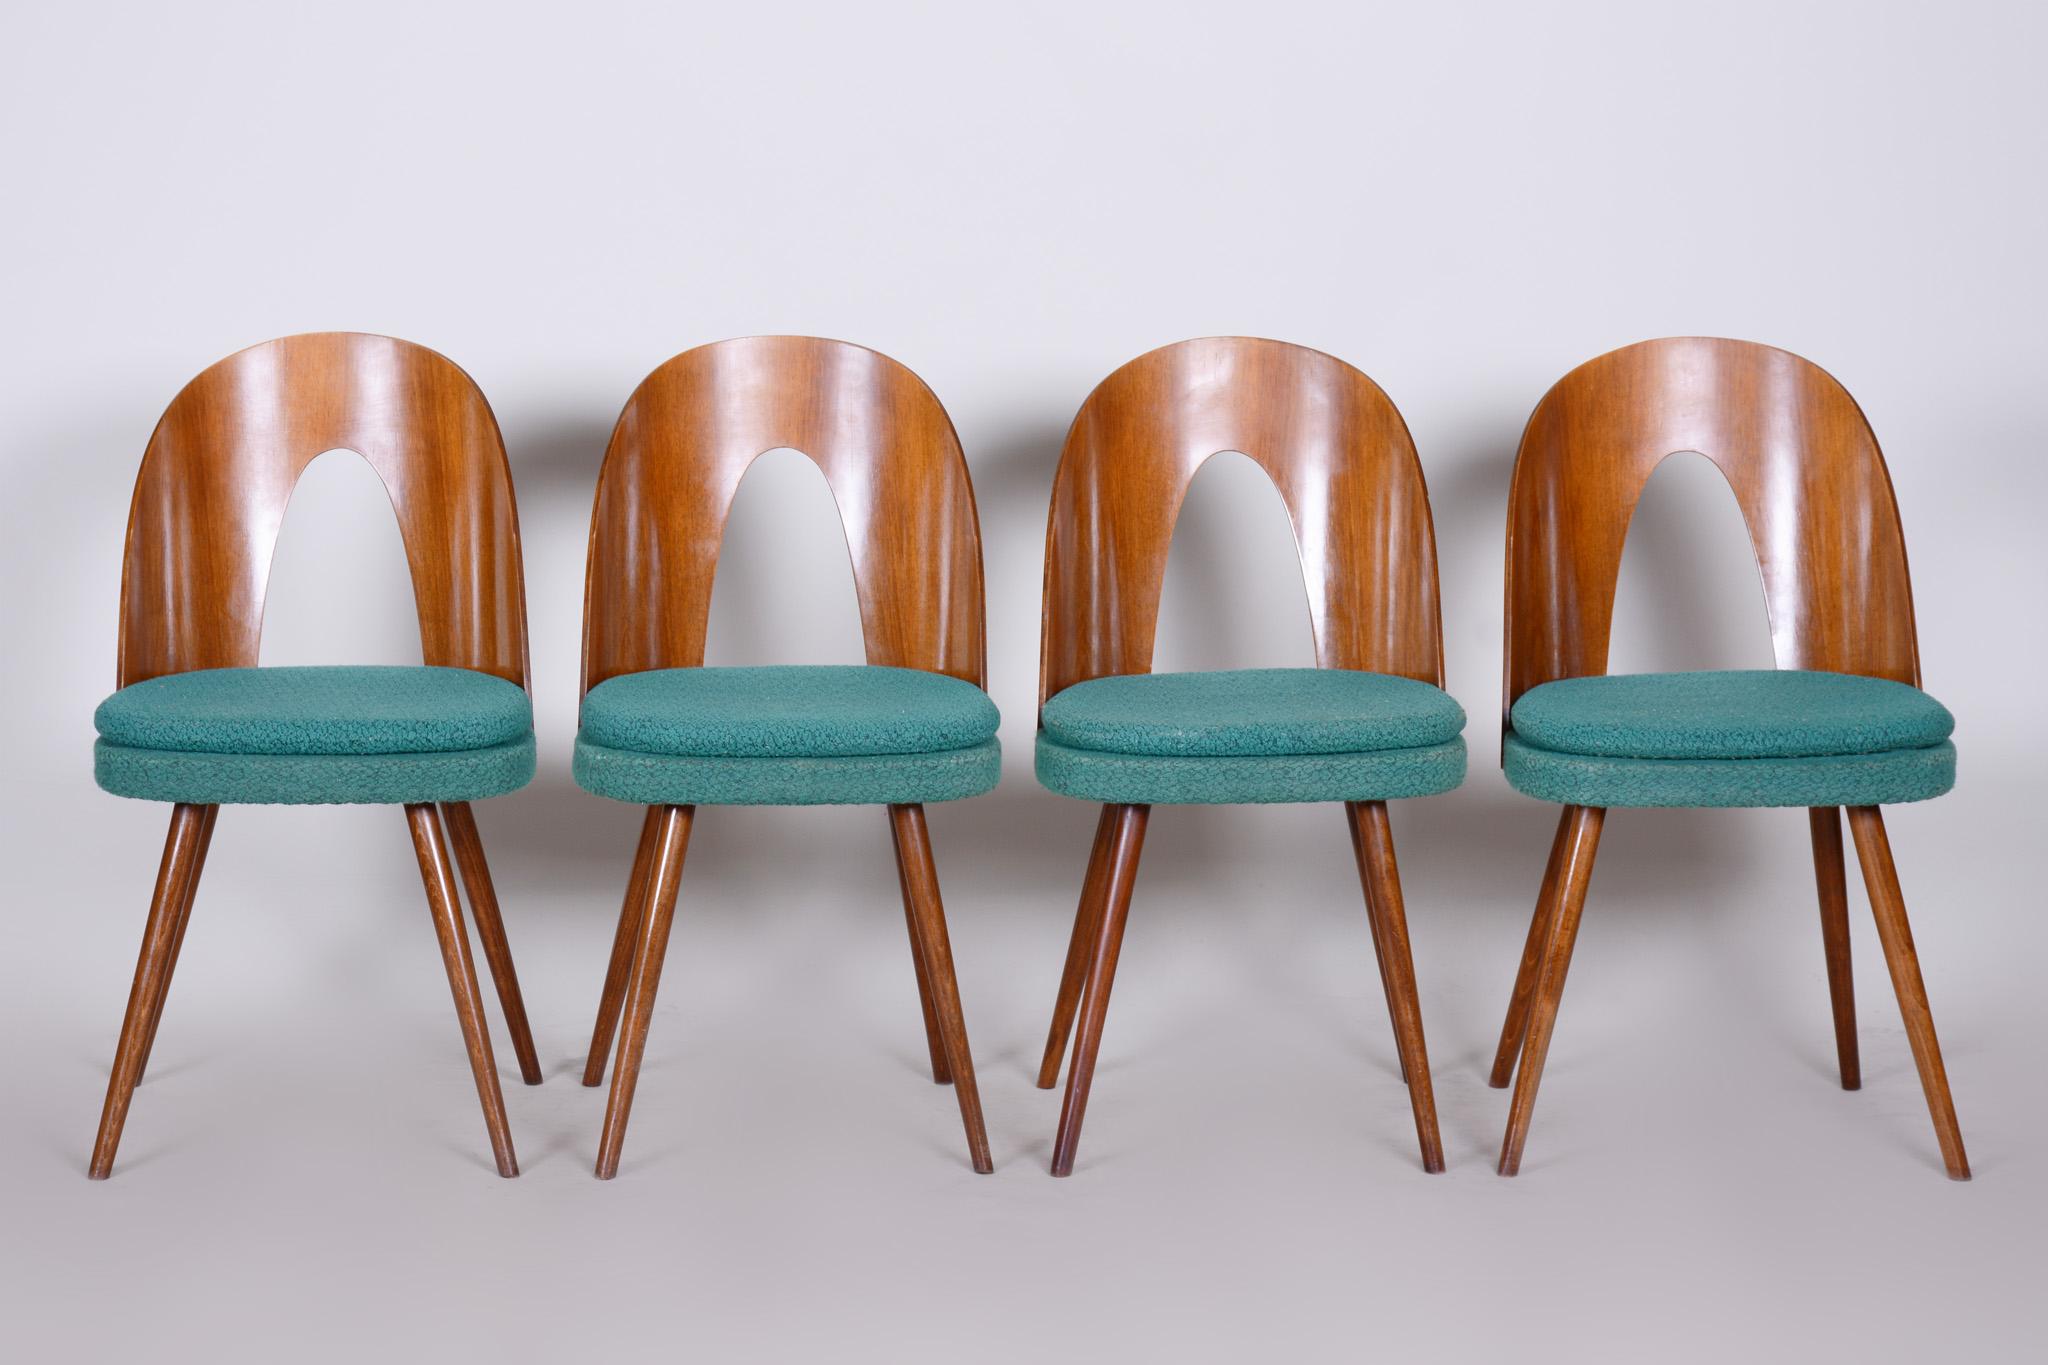 Czech midcentury chairs, 4 pieces.
Material: Ash
Period: 1950-1959
Original preserved condition
Made by architect Antonín Šuman.